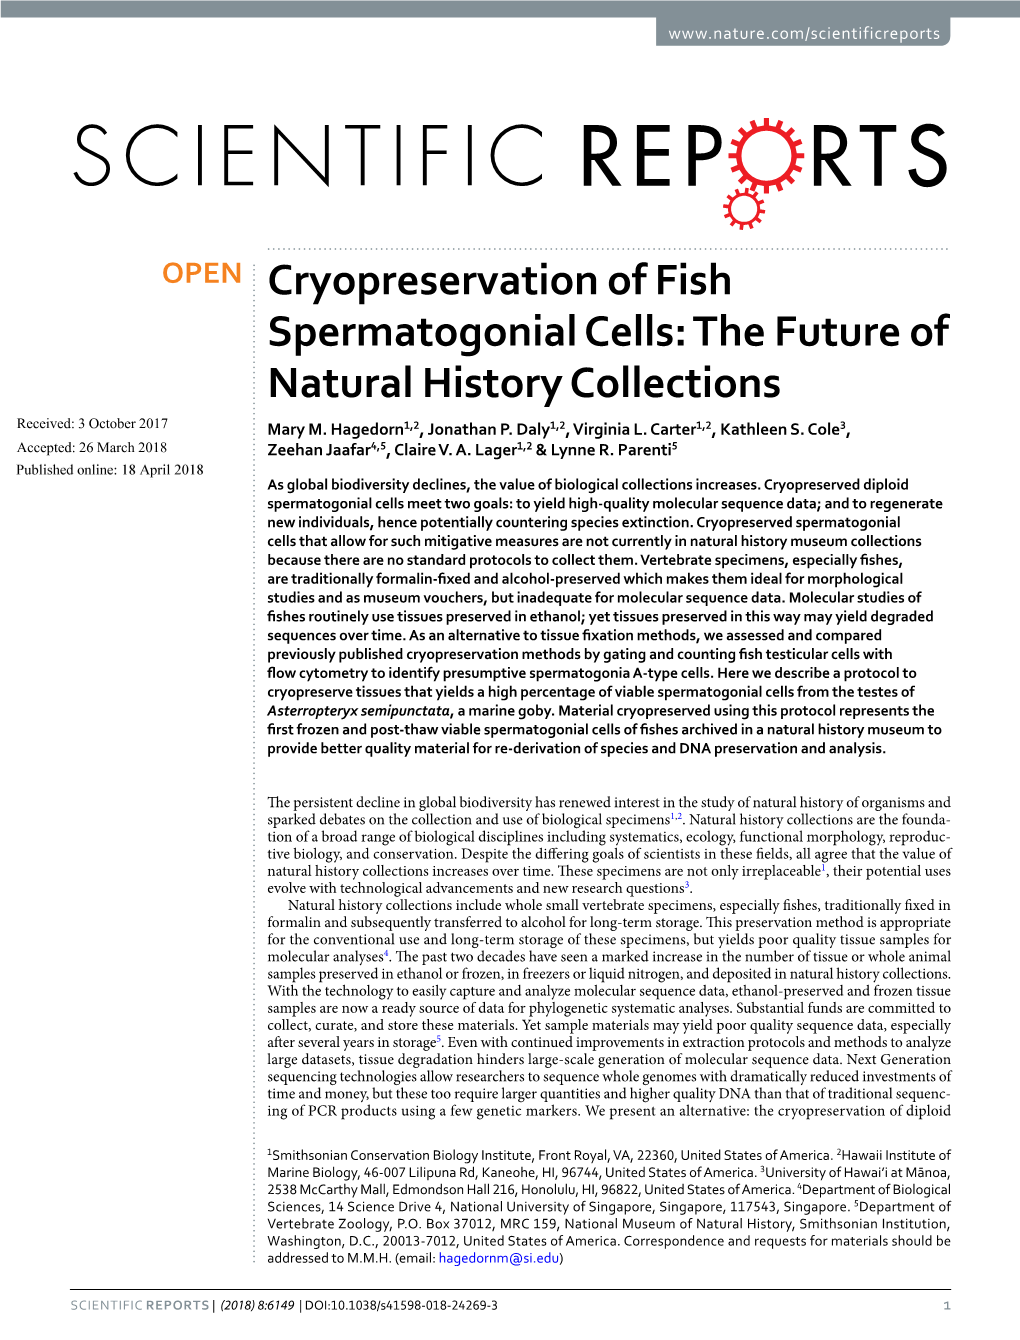 Cryopreservation of Fish Spermatogonial Cells: the Future of Natural History Collections Received: 3 October 2017 Mary M